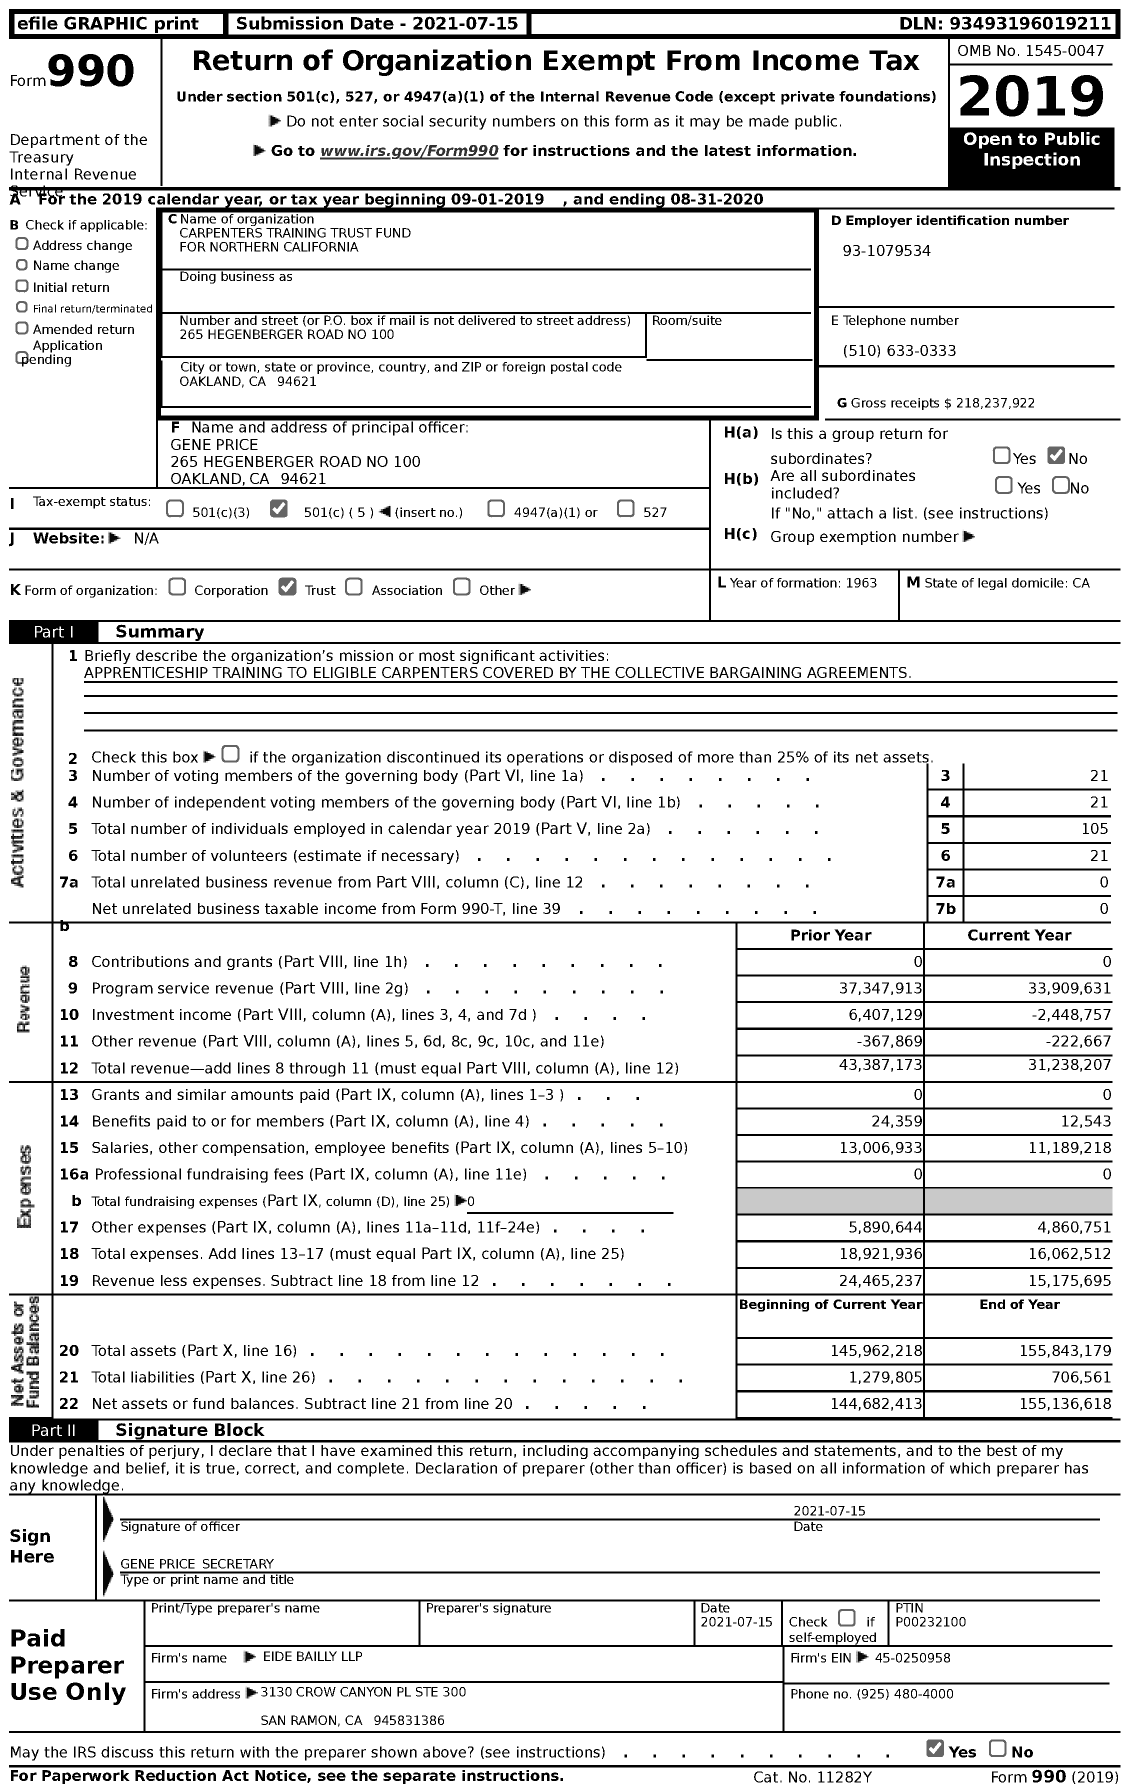 Image of first page of 2019 Form 990 for Carpenters Training Trust Fund for Northern California